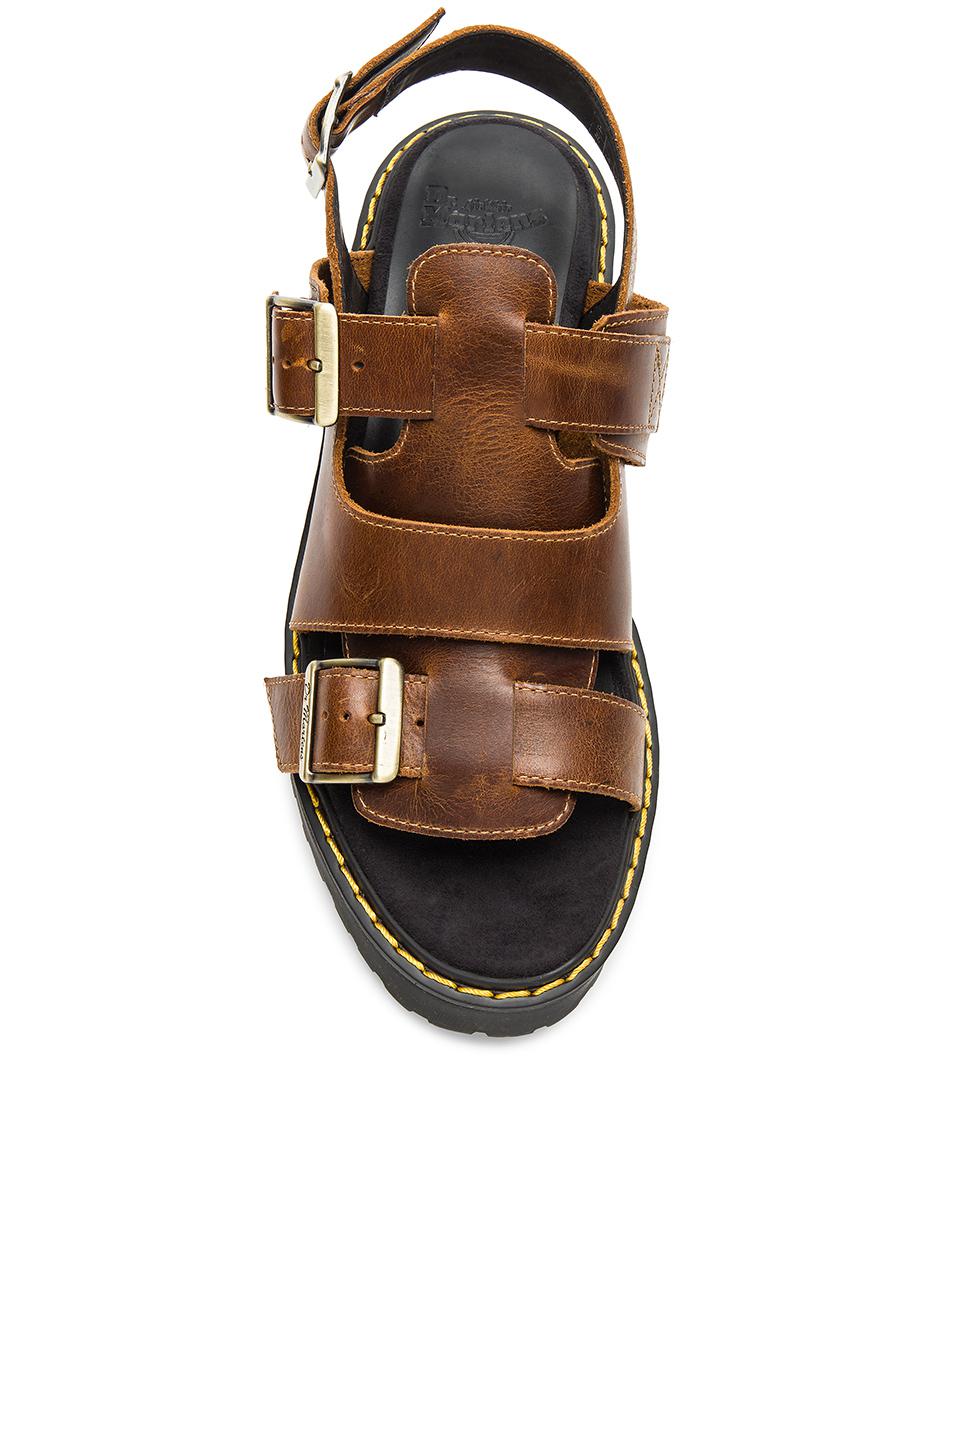 Dr. Martens Leather Ariel Sandal in Butterscotch (Brown) | Lyst